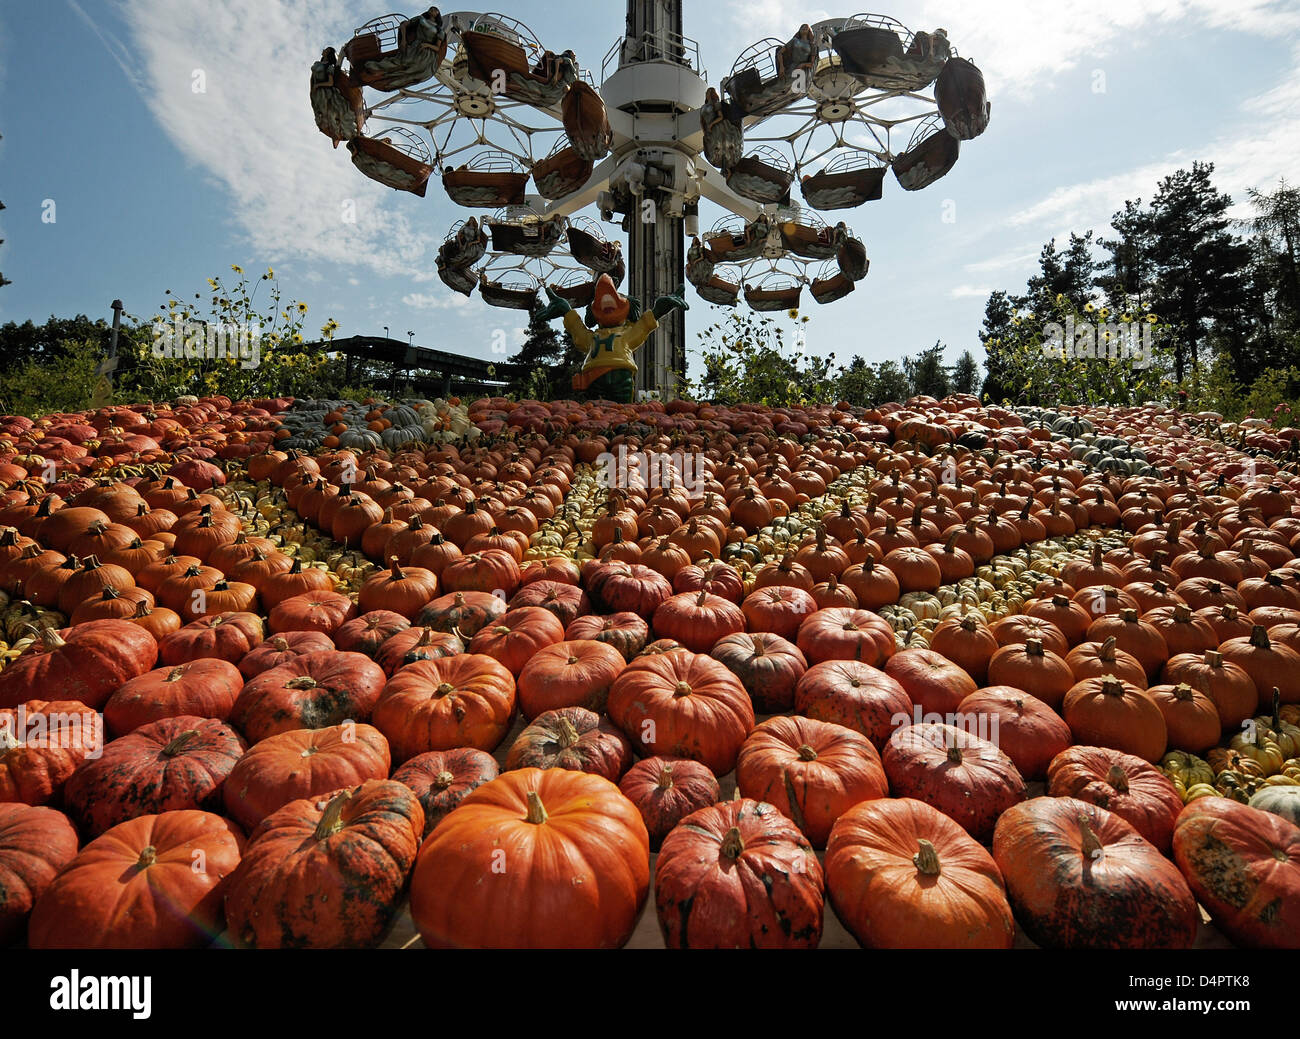 Pumpkins on display during a pumpkin sculpture exhibition at Holiday Park in Hassloch, Germany, 01 September 2009. The theme park stages an exhibition of pumpkin sculptures from 01 September to 01 November 2009. Fifty tons of 80 pumpkin varieties were used. Photo: RONLAD WITTEK Stock Photo